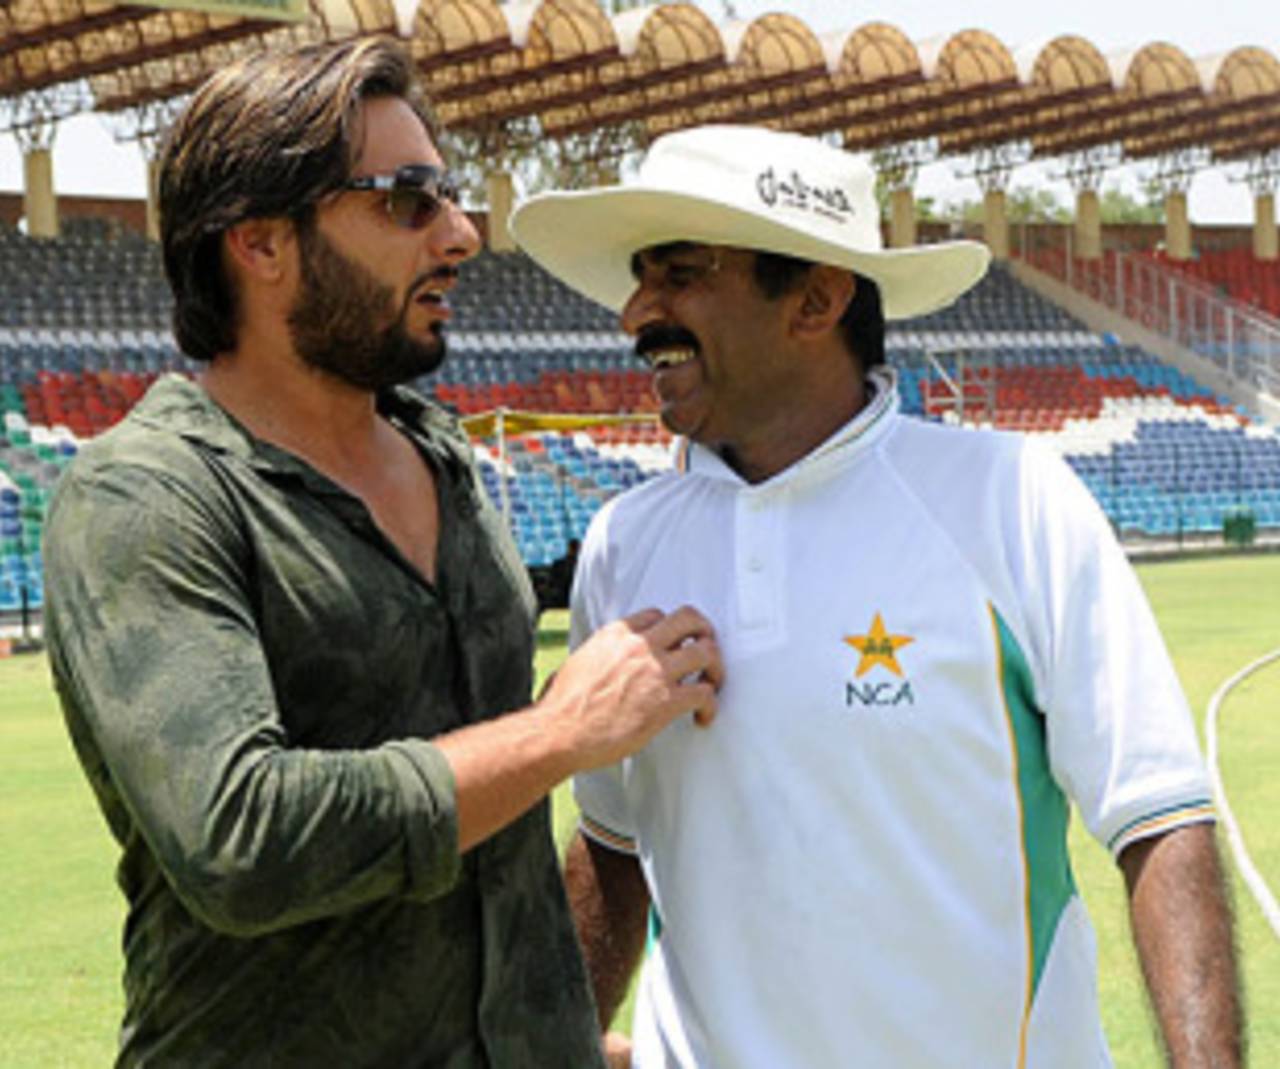 Shahid Afridi shares a light moment with Javed Miandad, Lahore, May 25, 2010